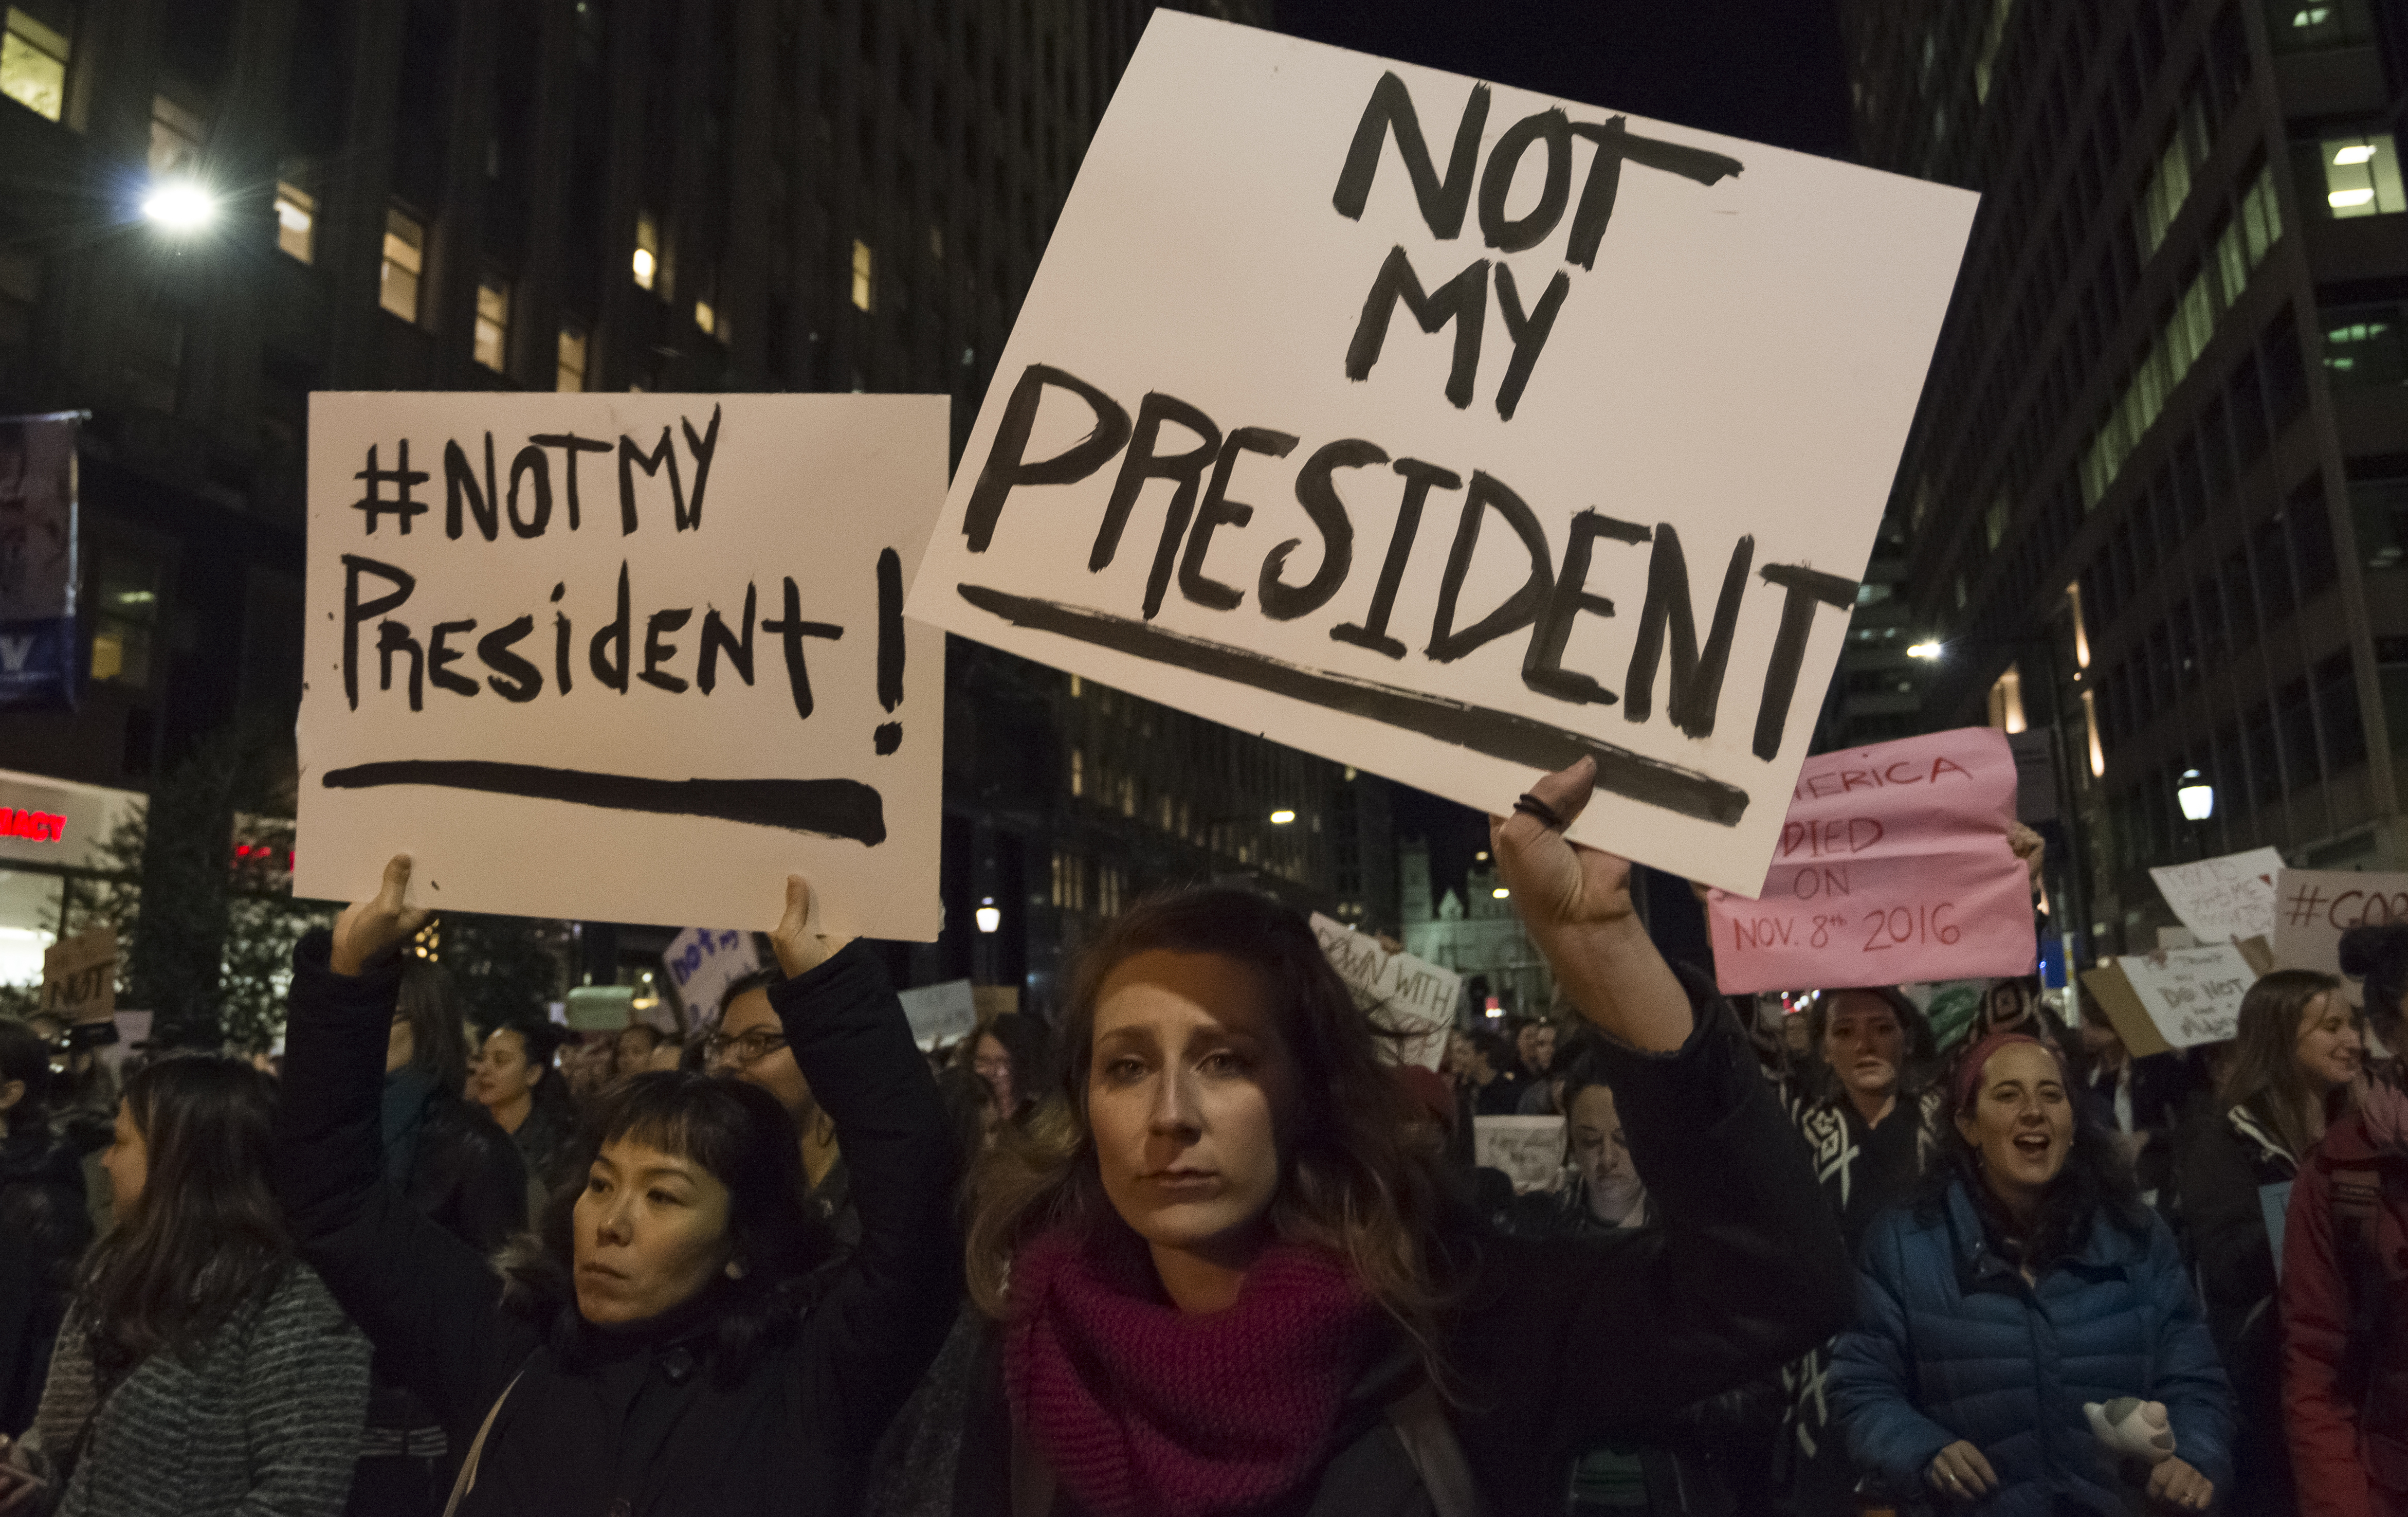 Demonstrators stage a n protest decrying the political agenda of President-elect Donald J. Trump.